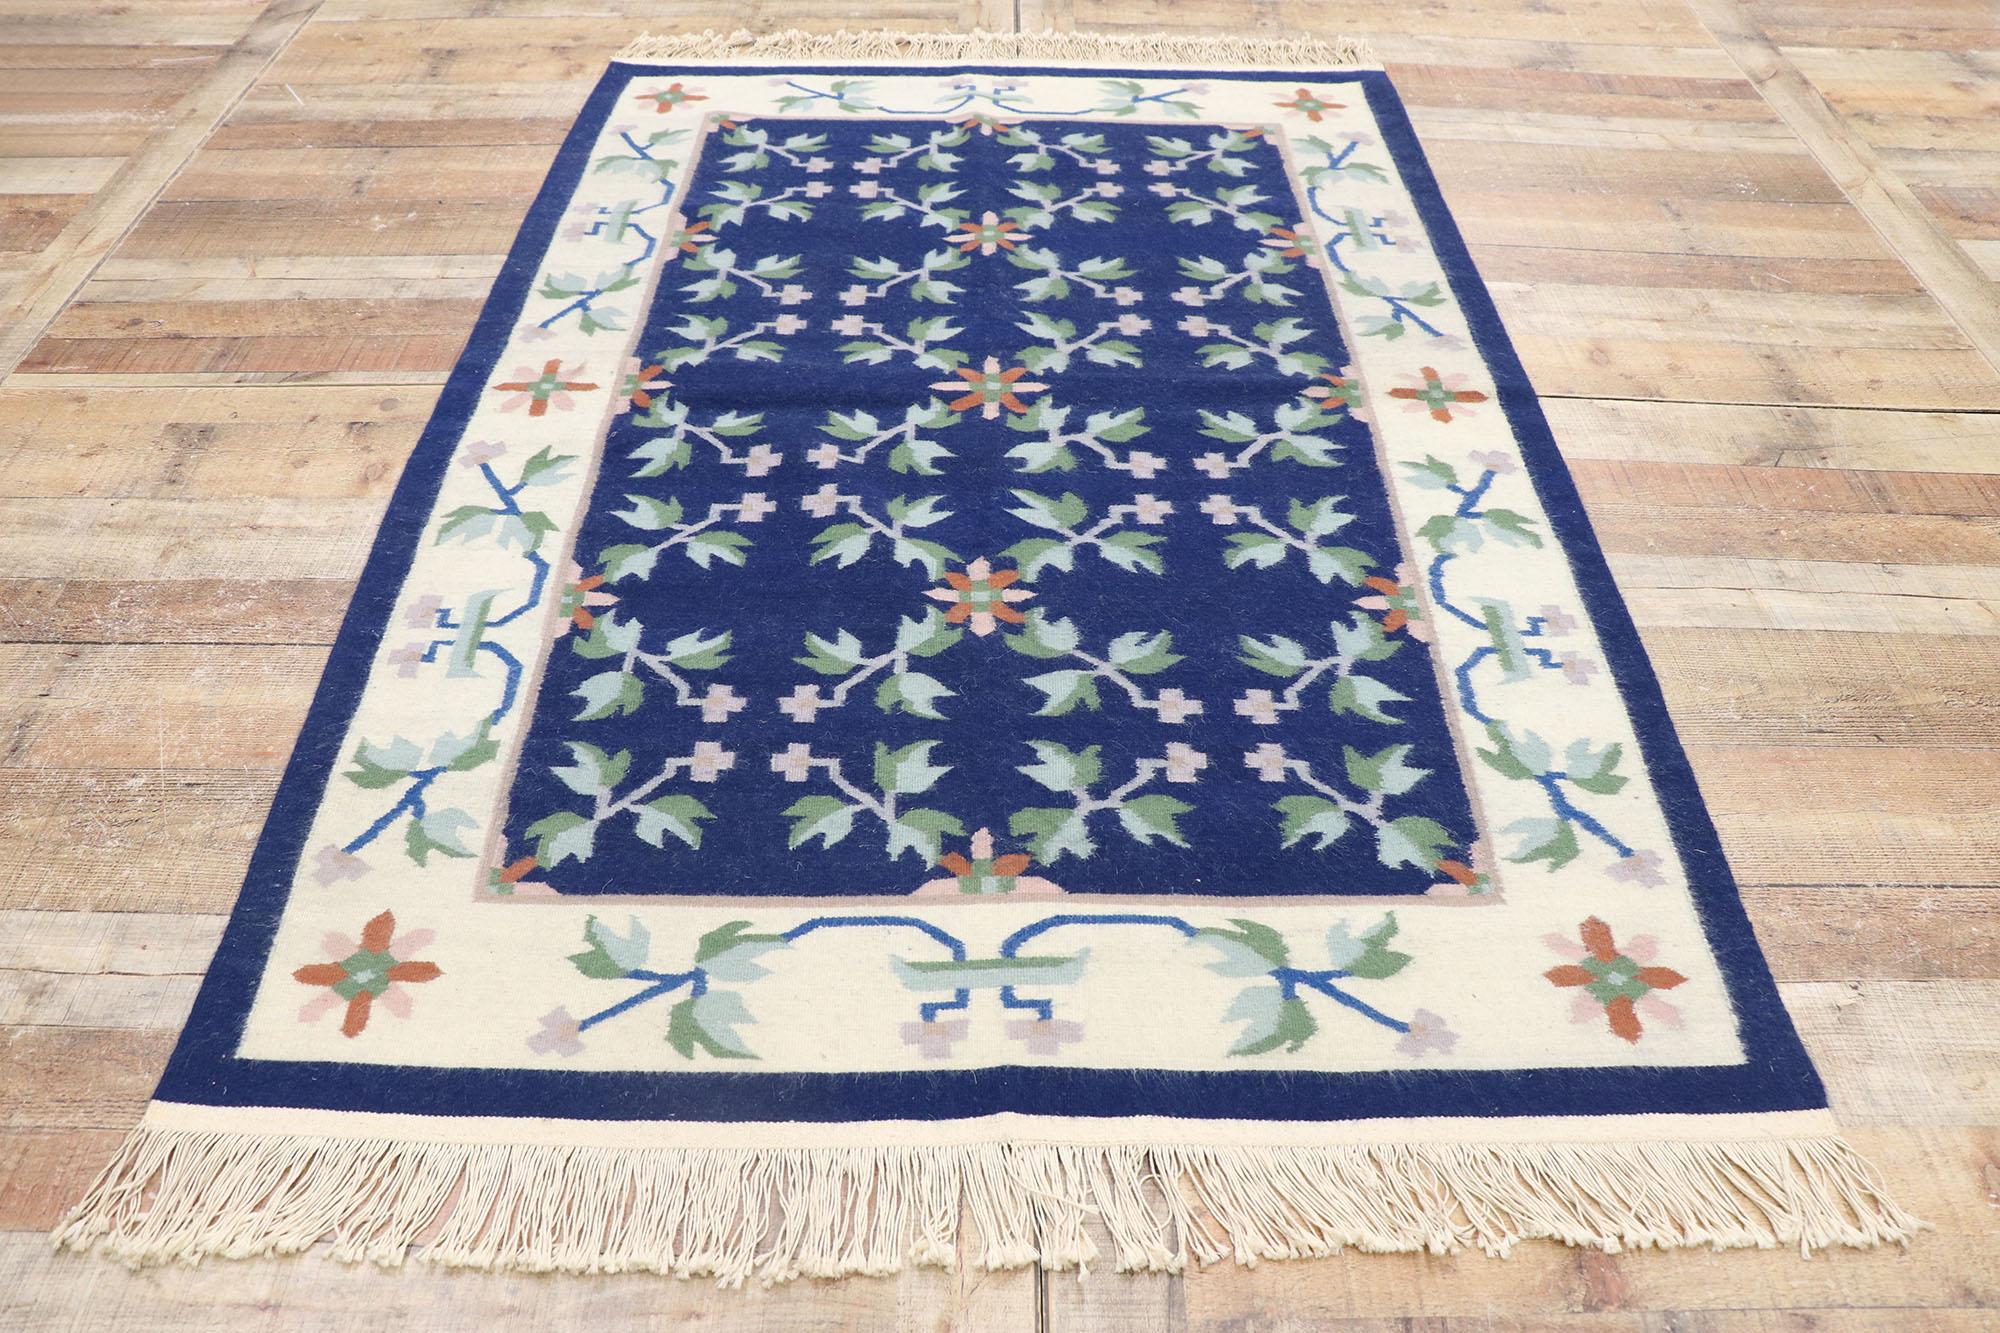 Vintage Floral Kilim Rug with English Chintz Style In Good Condition For Sale In Dallas, TX